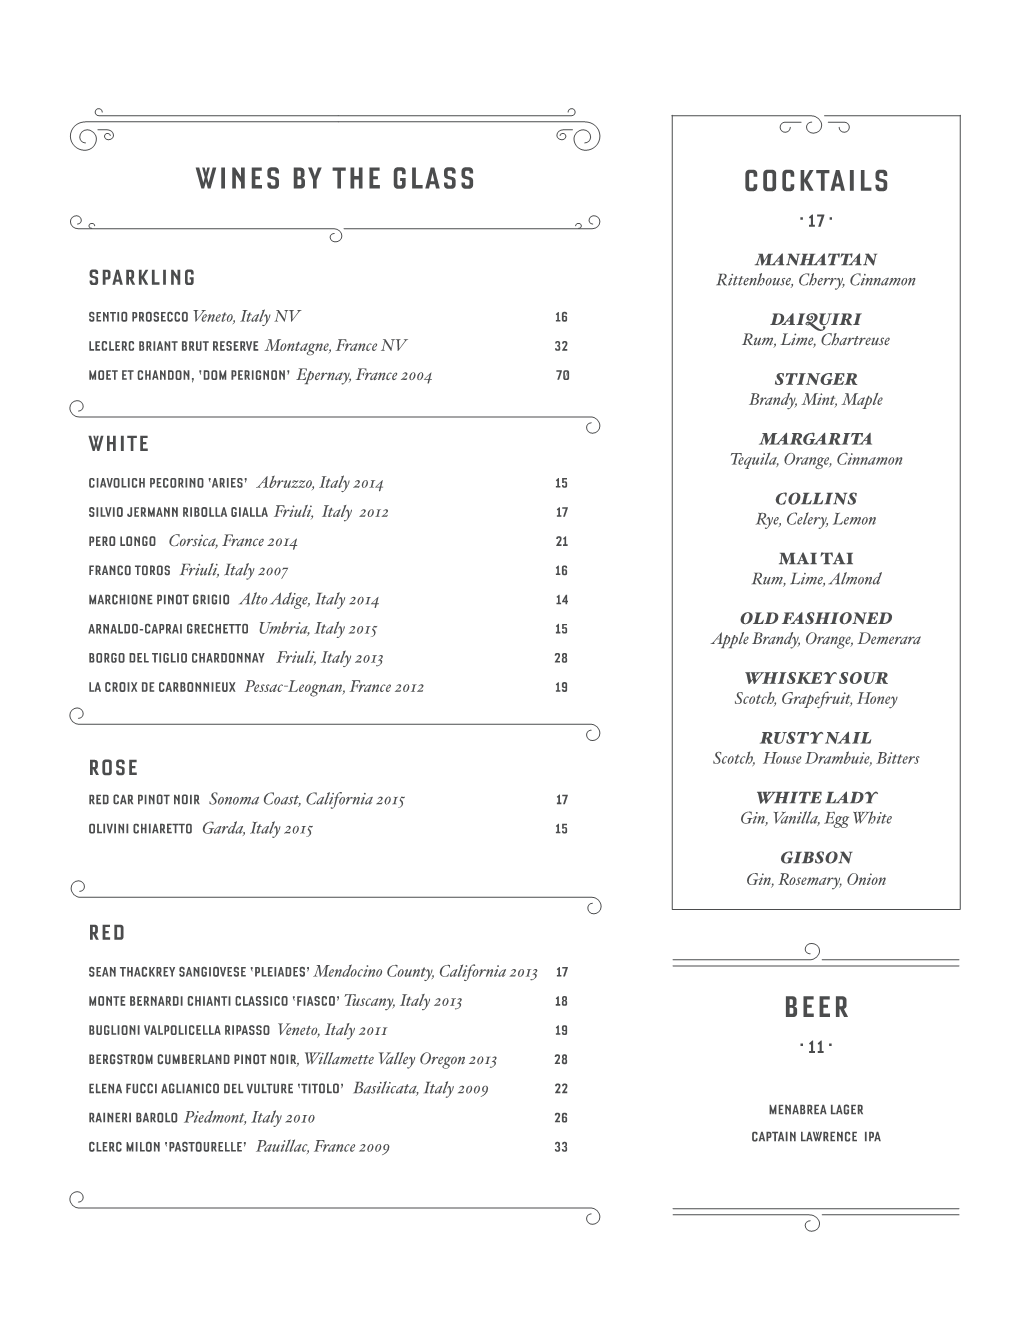 Wines by the Glass Cocktails Beer